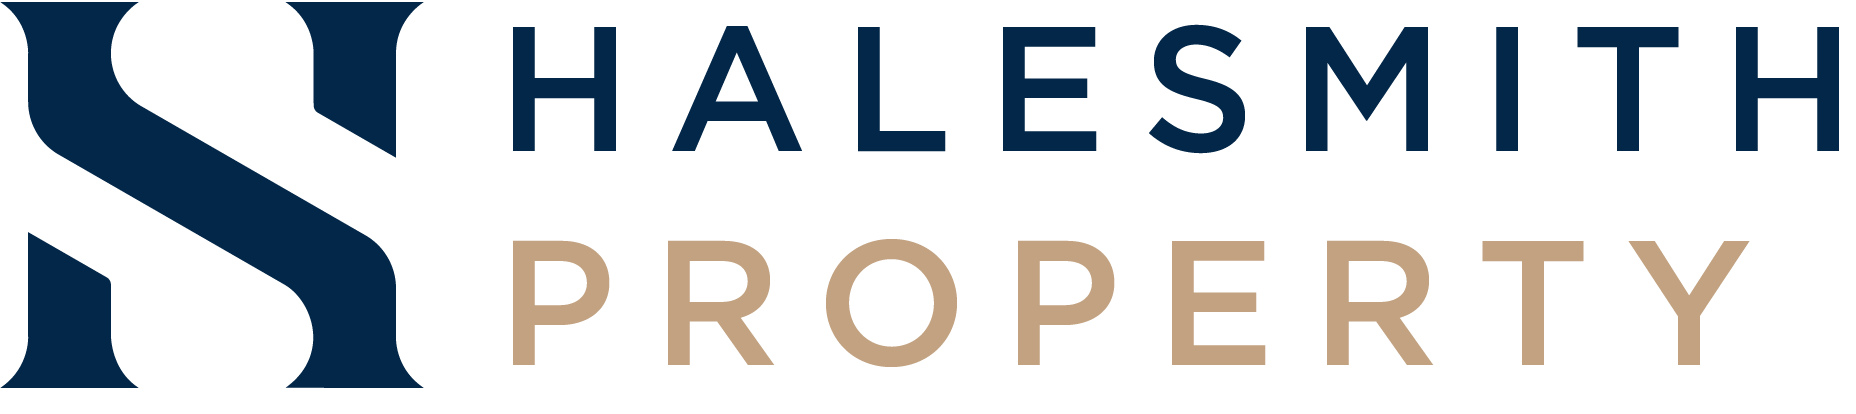 Halesmith Property - Boutique Property Consultancy